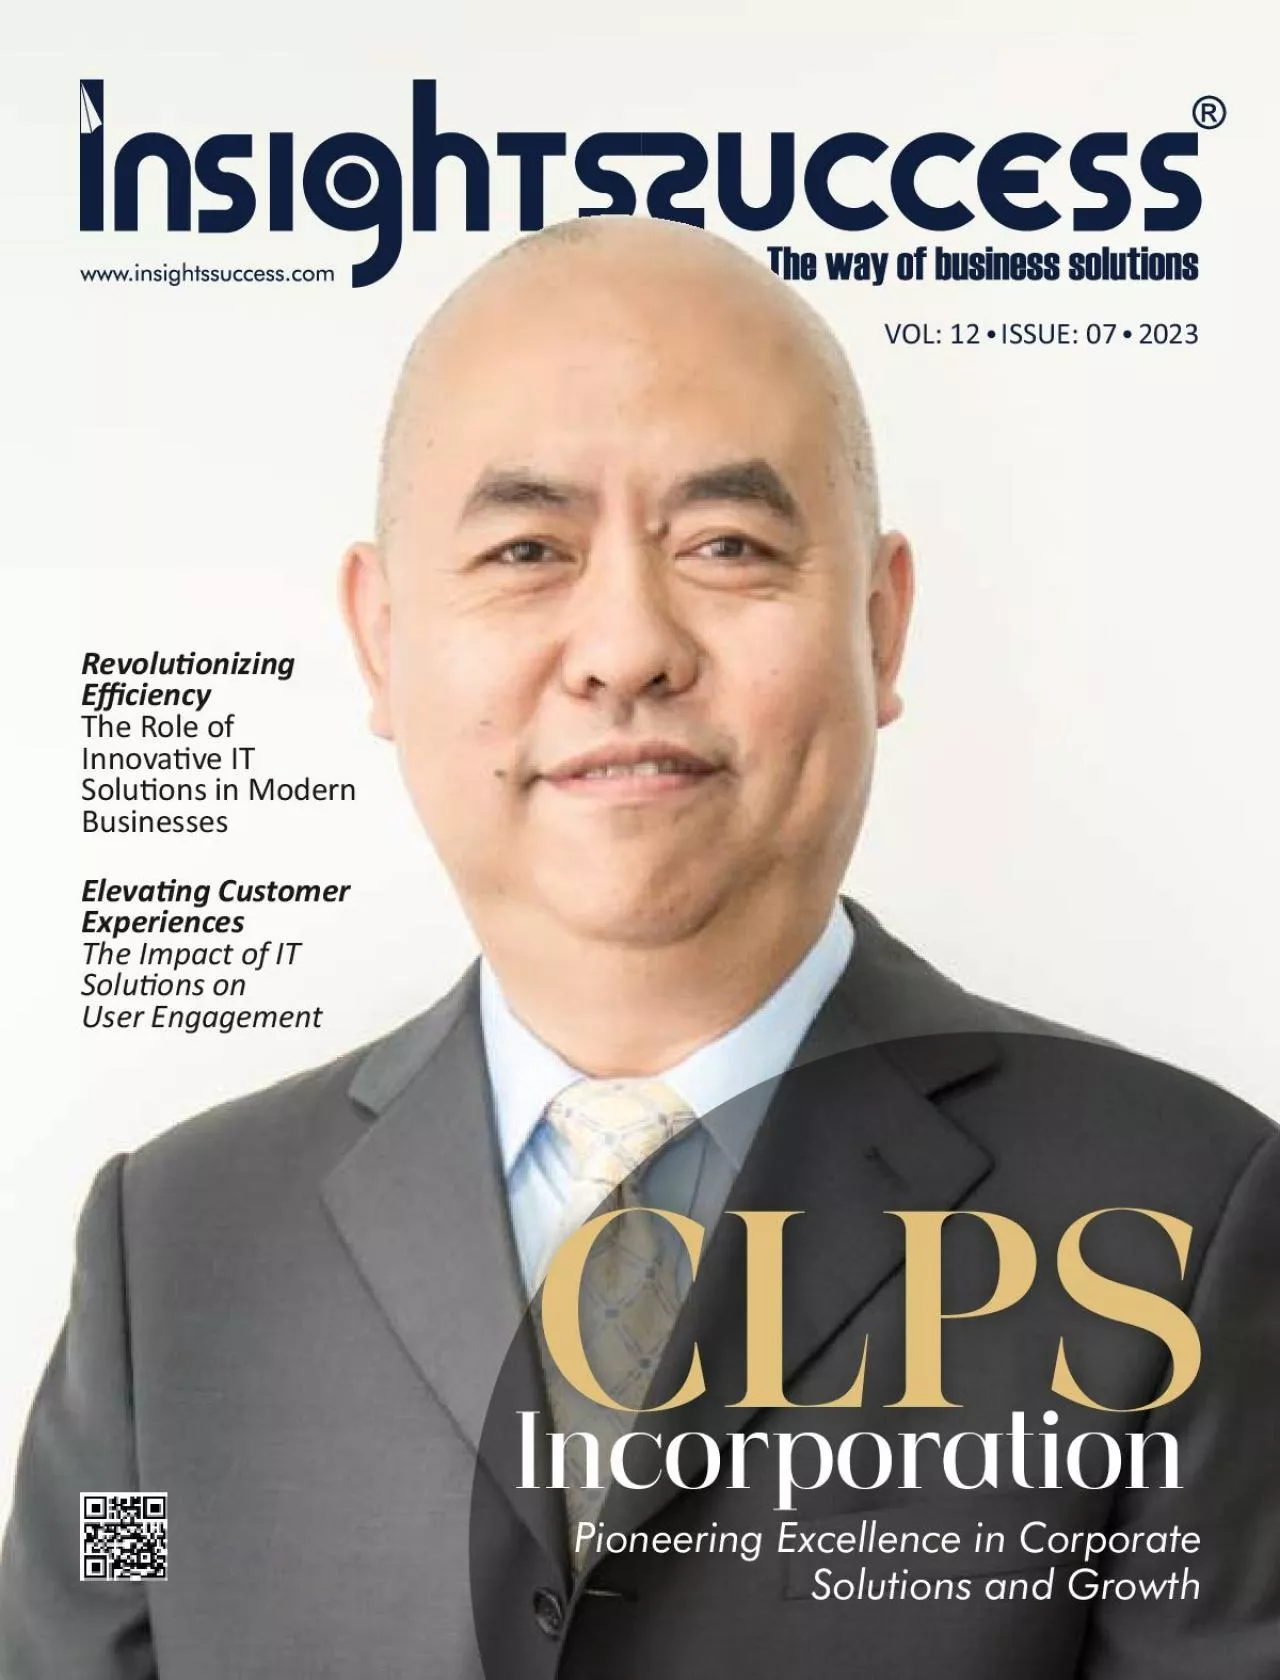 CLPS Incorporation - Pioneering Excellence in Corporate Solutions and Growth